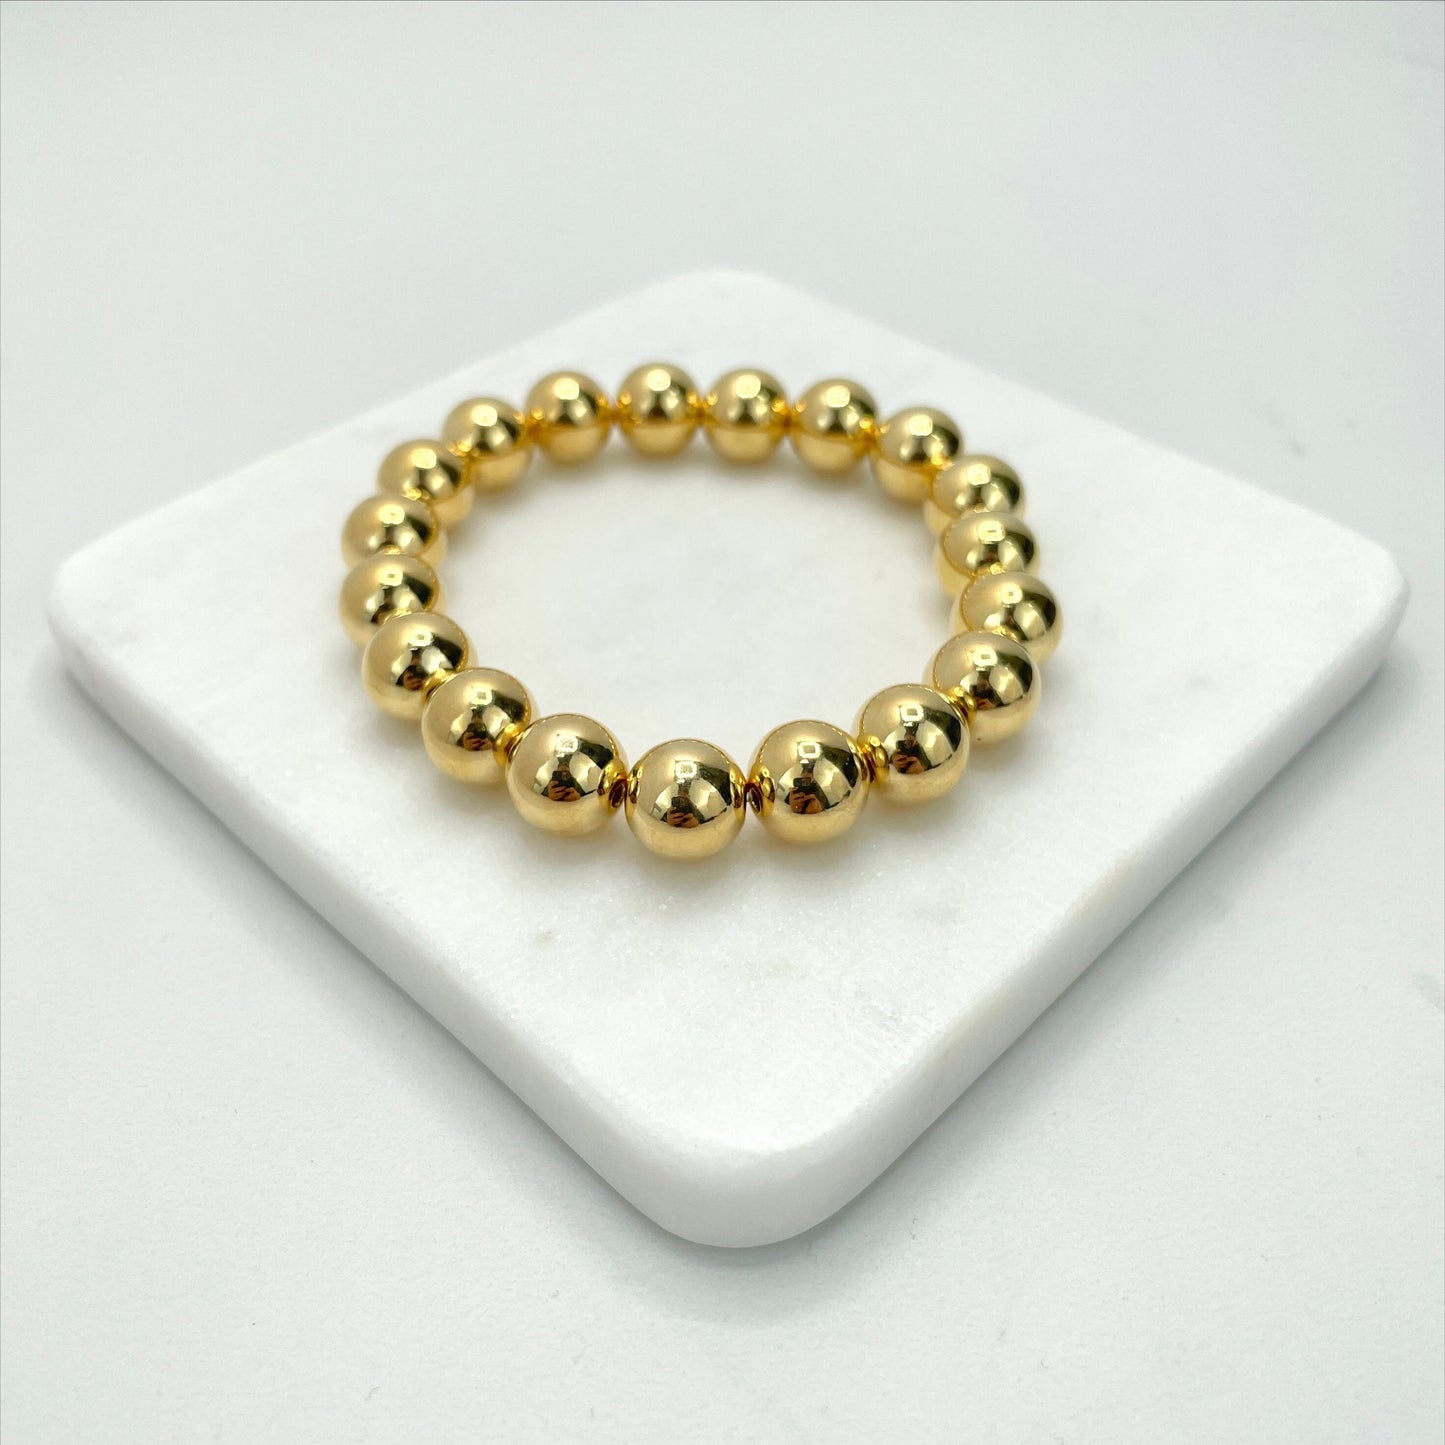 18k Gold Filled Beads 10mm, 8mm, 6mm or 4mm, Beaded Bracelet Wholesale Jewelry Making Supplies